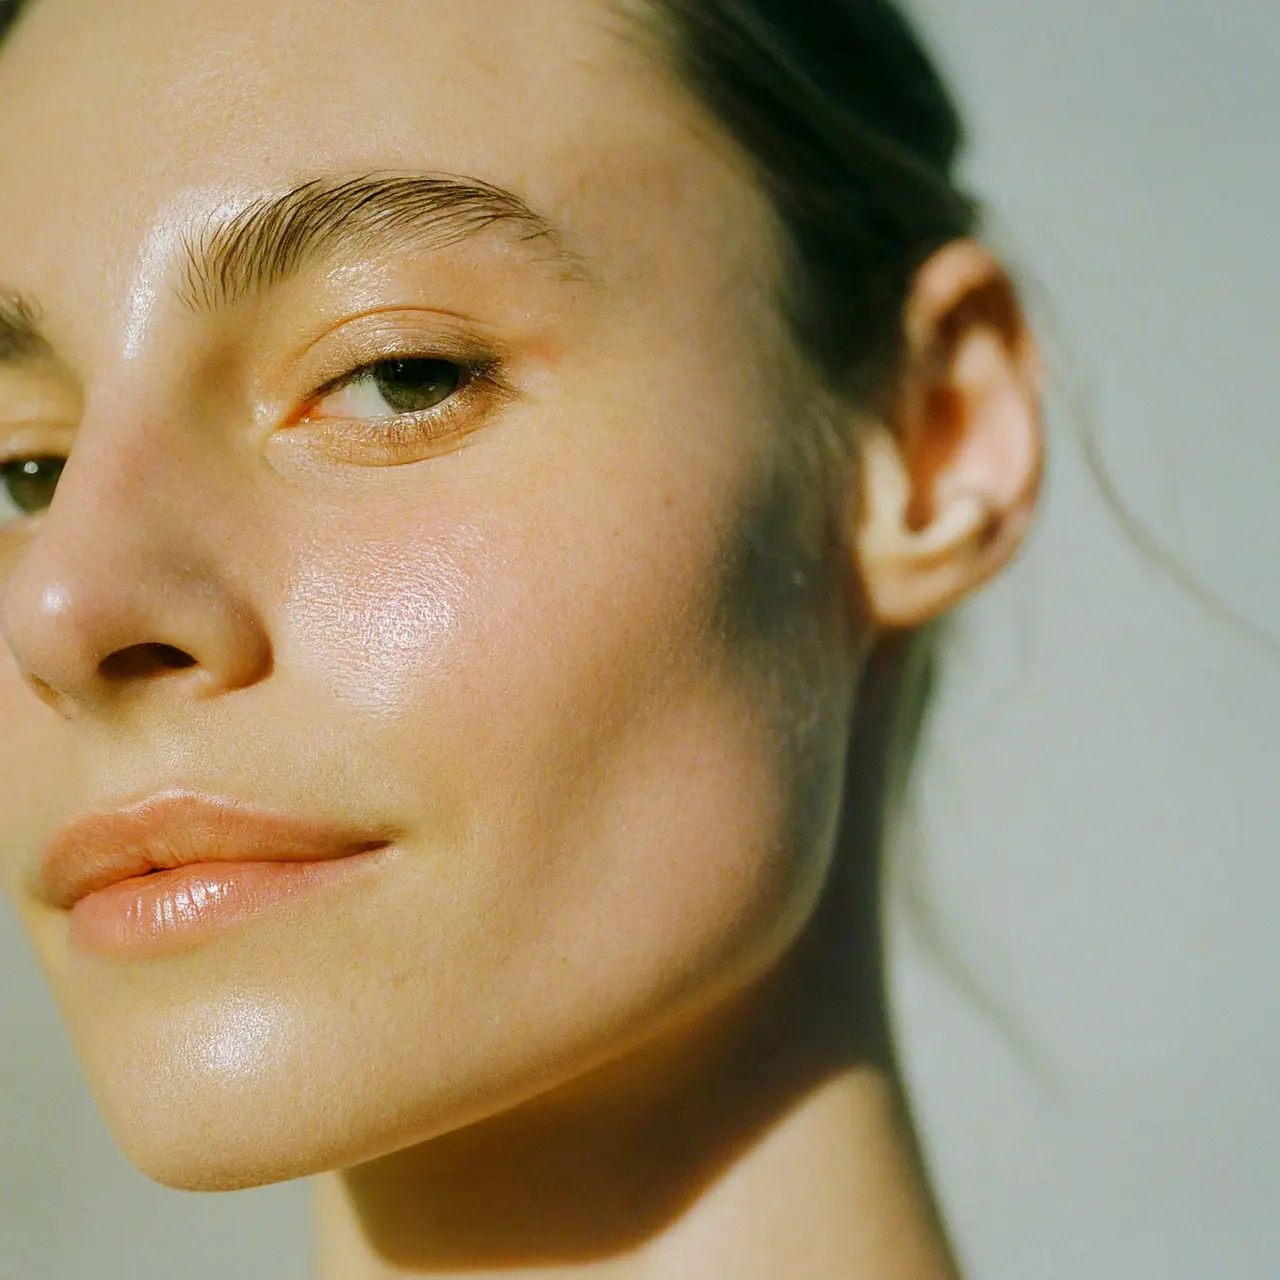 Close-up of a radiant, healthy-looking facial skin. 35mm stock photo